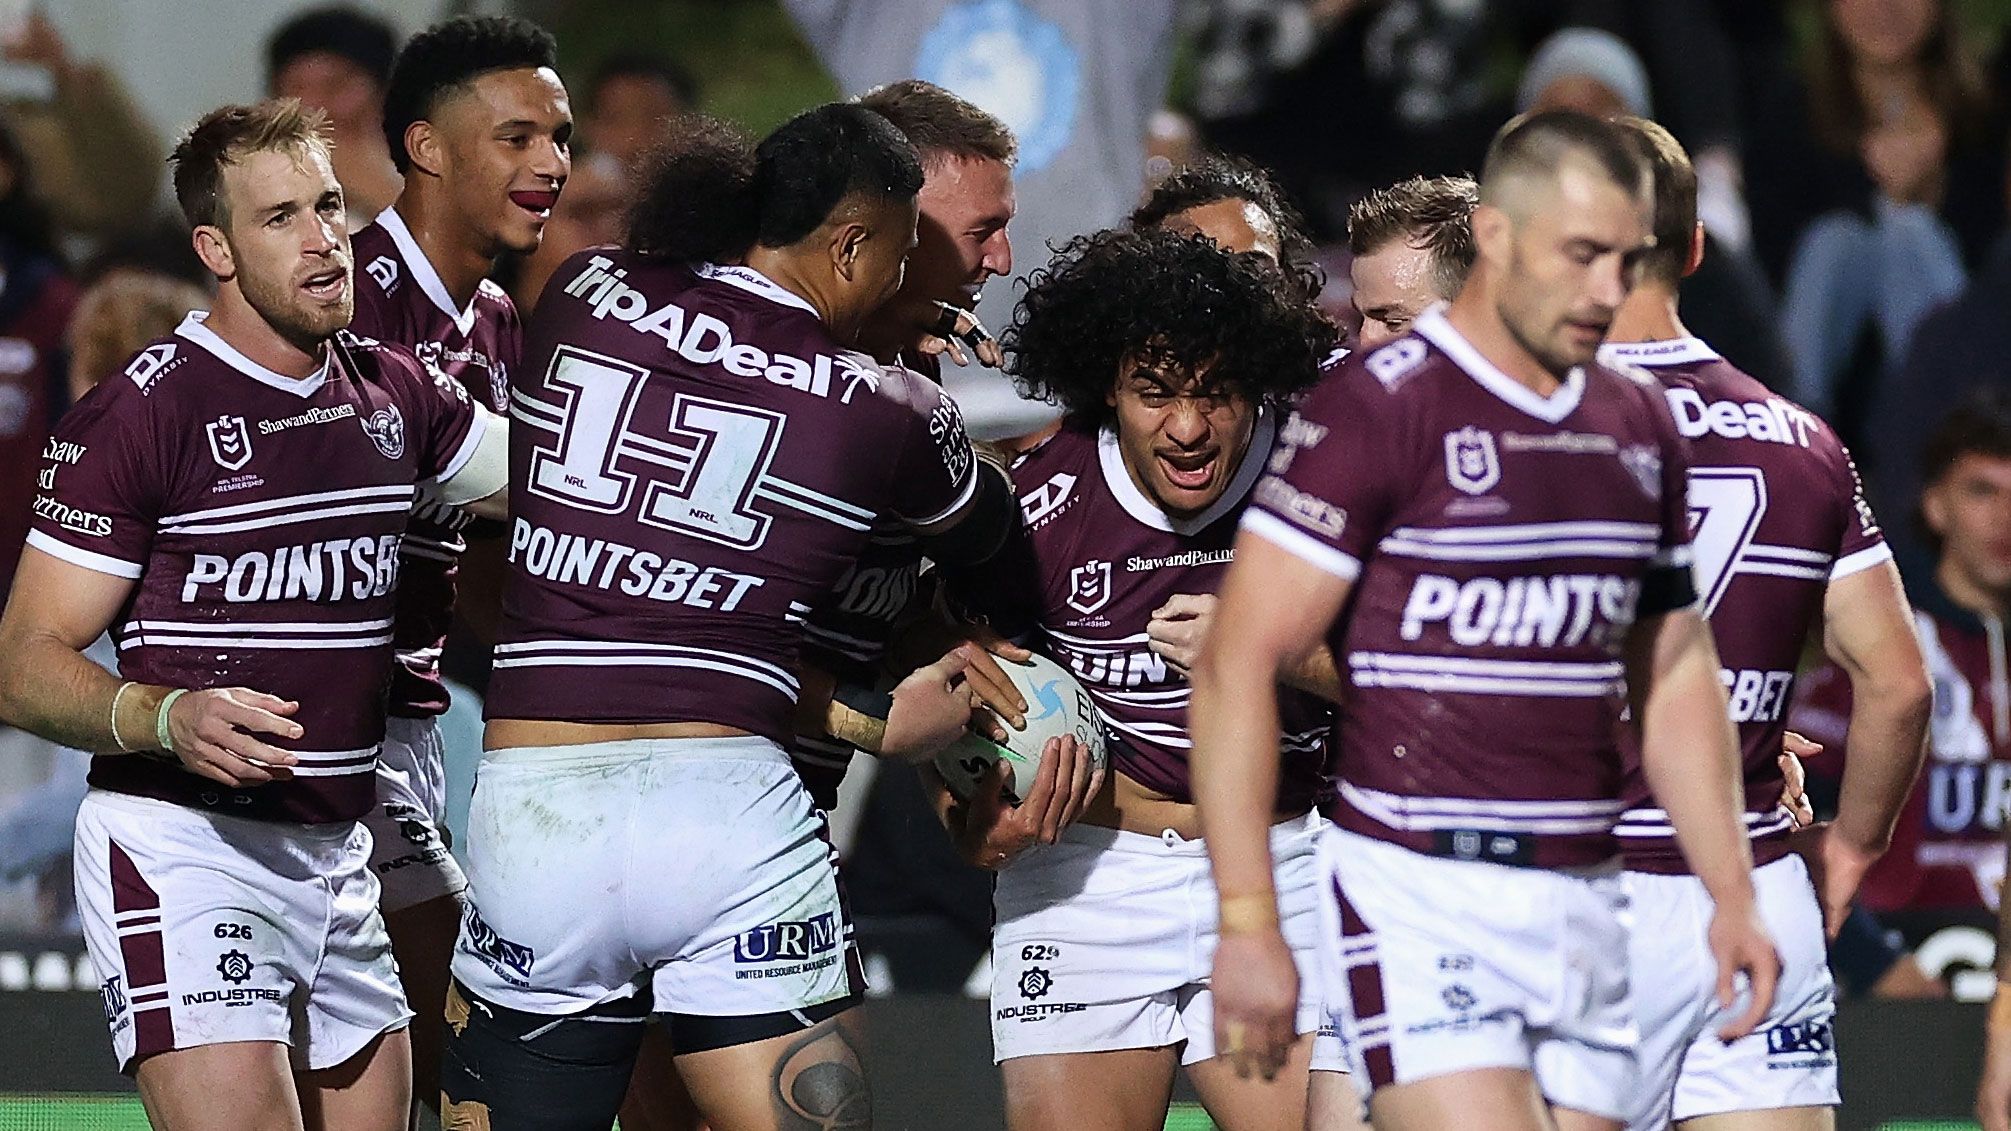 Christian Tuipulotu celebrates scoring a try during the round 16 NRL match between Manly and the Storm.